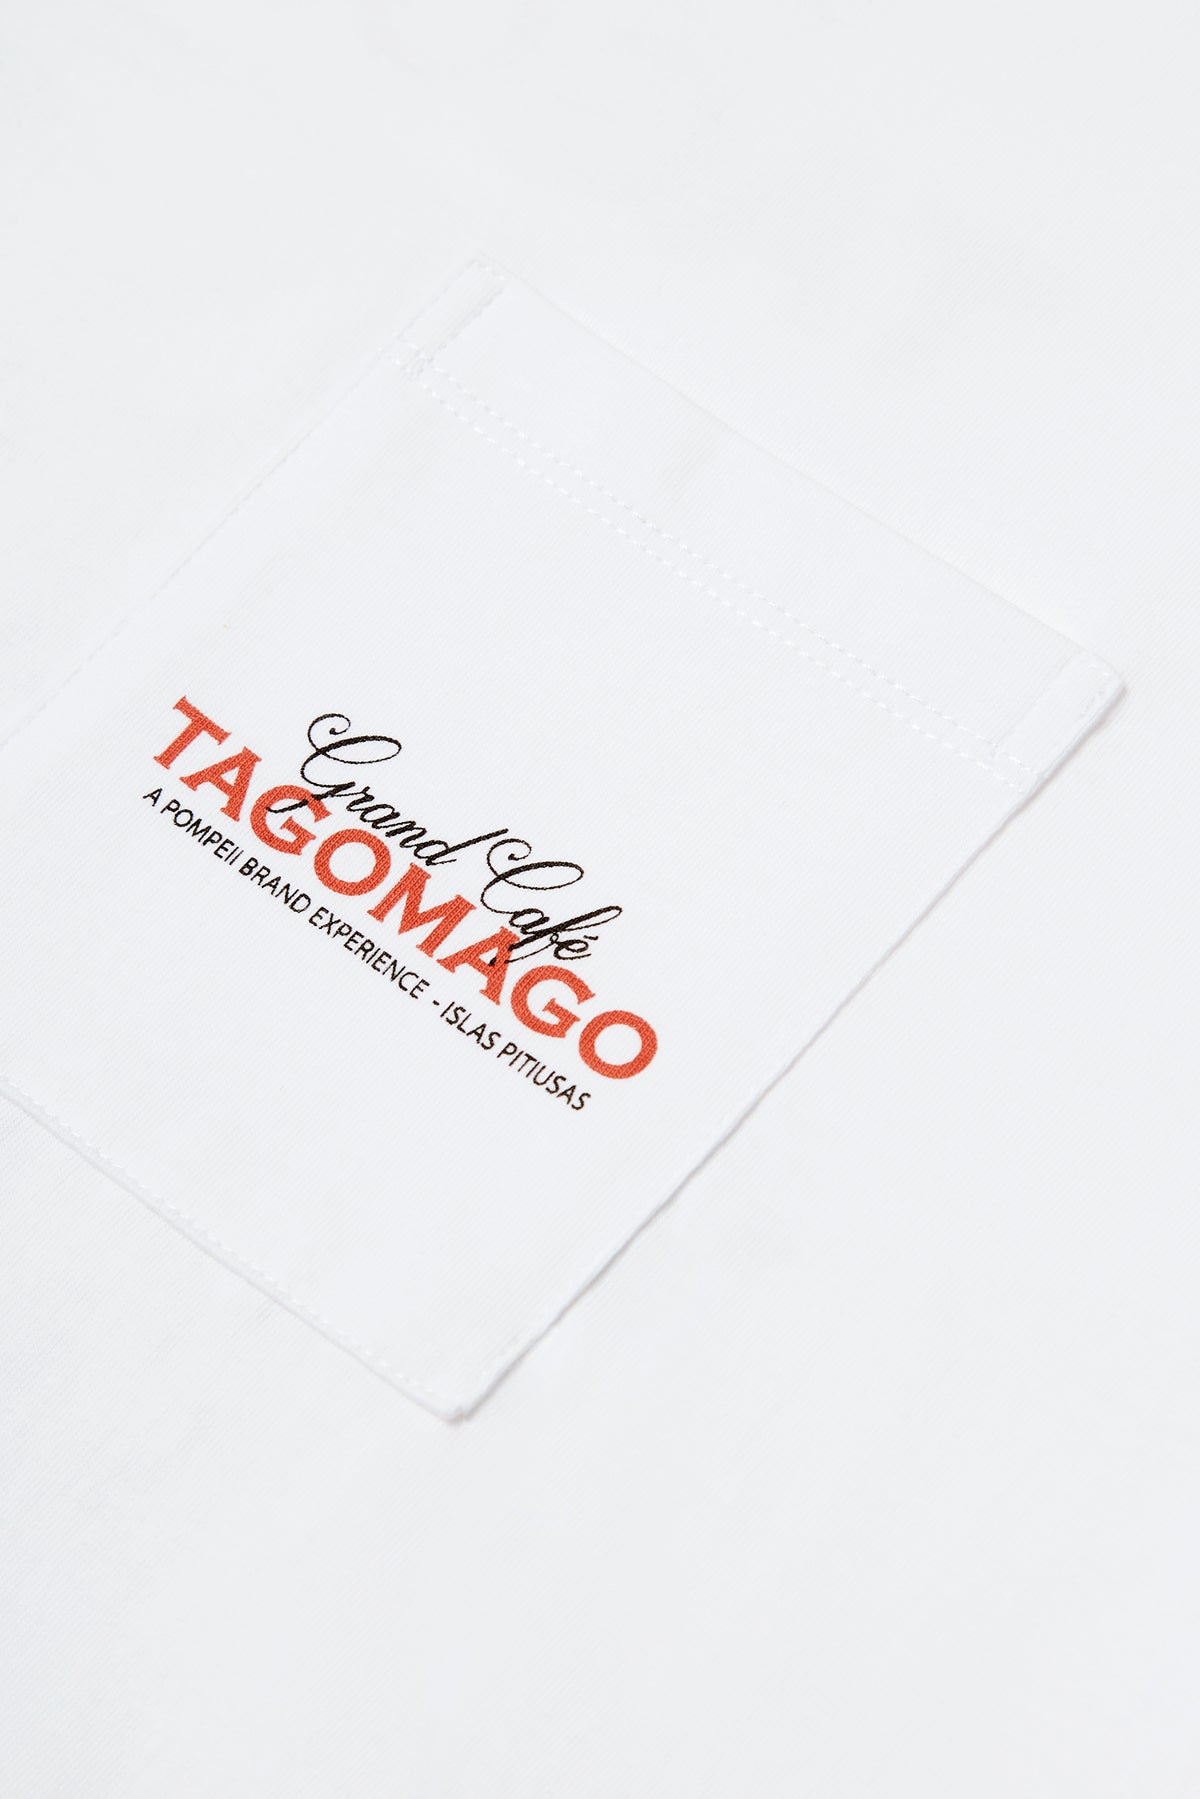 TOMAGO GRAPHIC TEE COFFEE